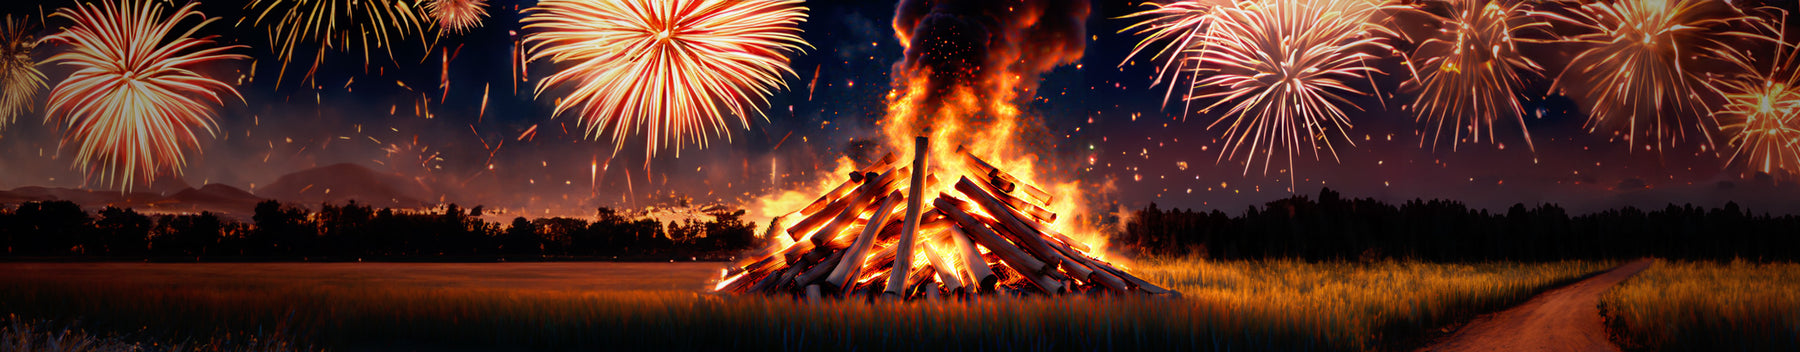 Whittington Community Bonfire & Fireworks Event: Everything You Need to Know